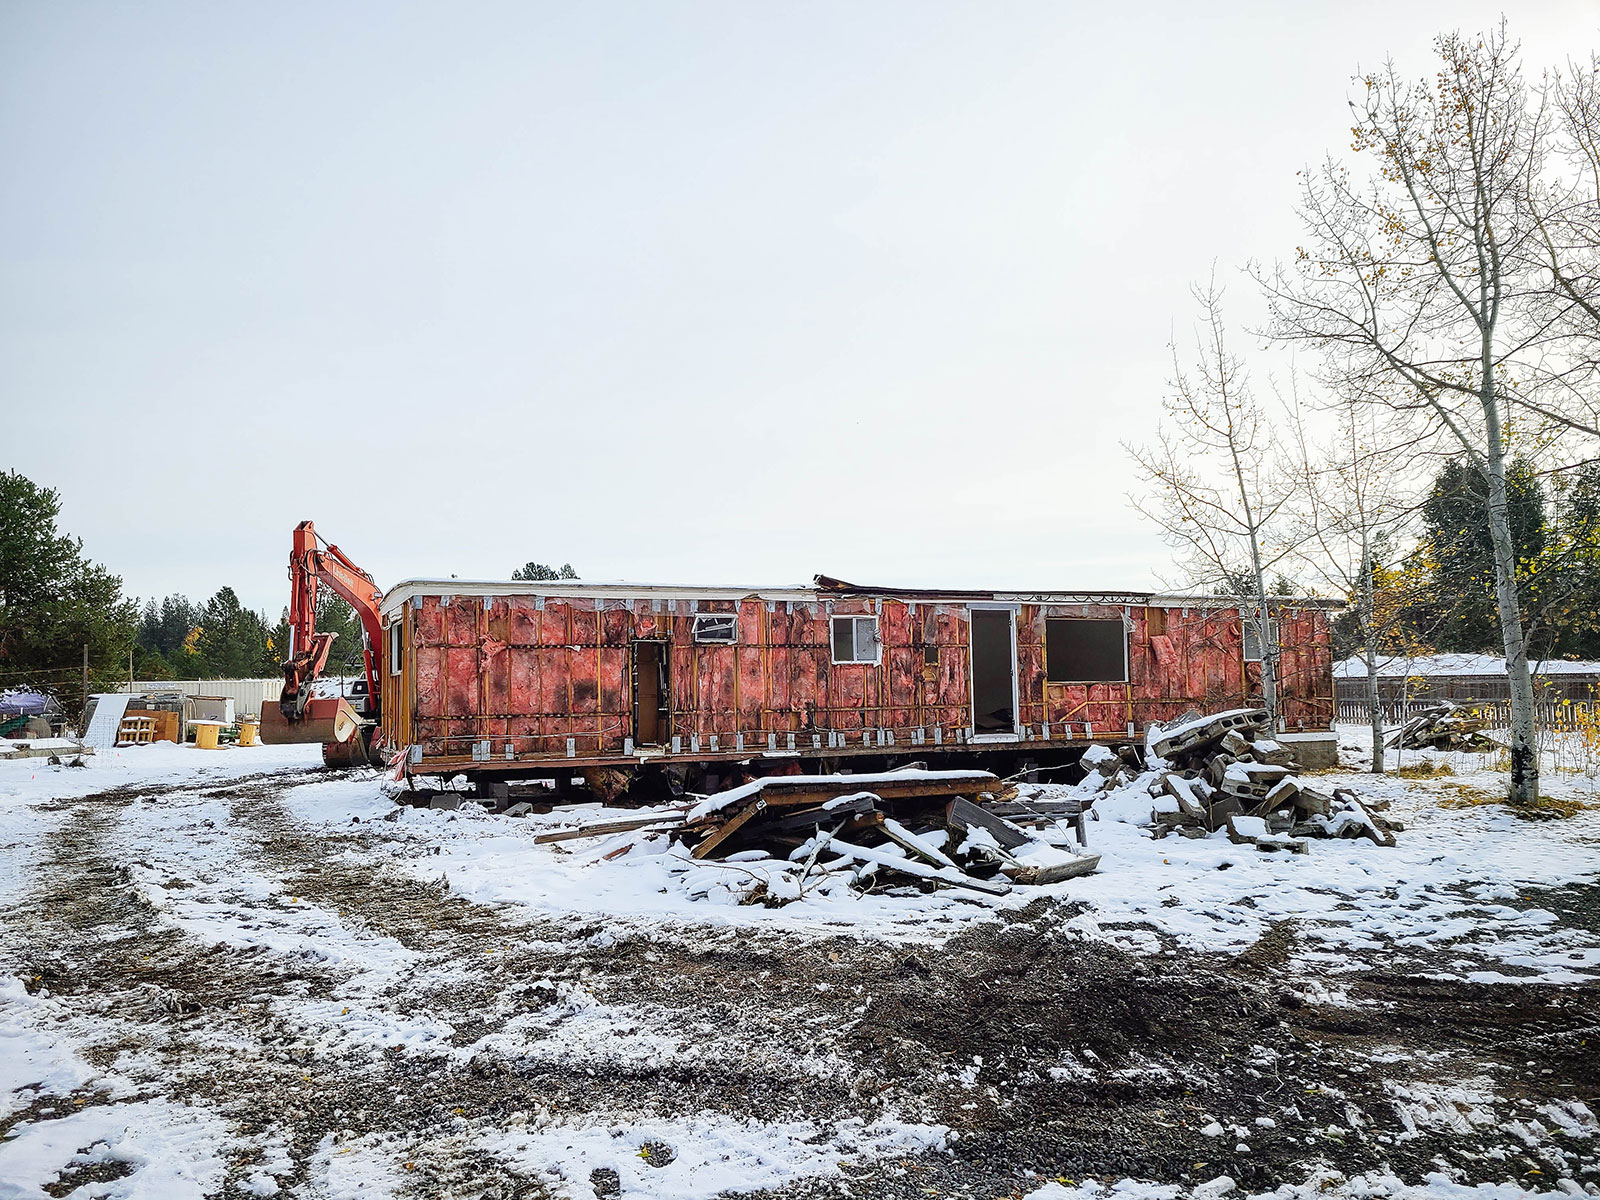 A manufactured home with all the siding removed during excavation, revealing pink insulation